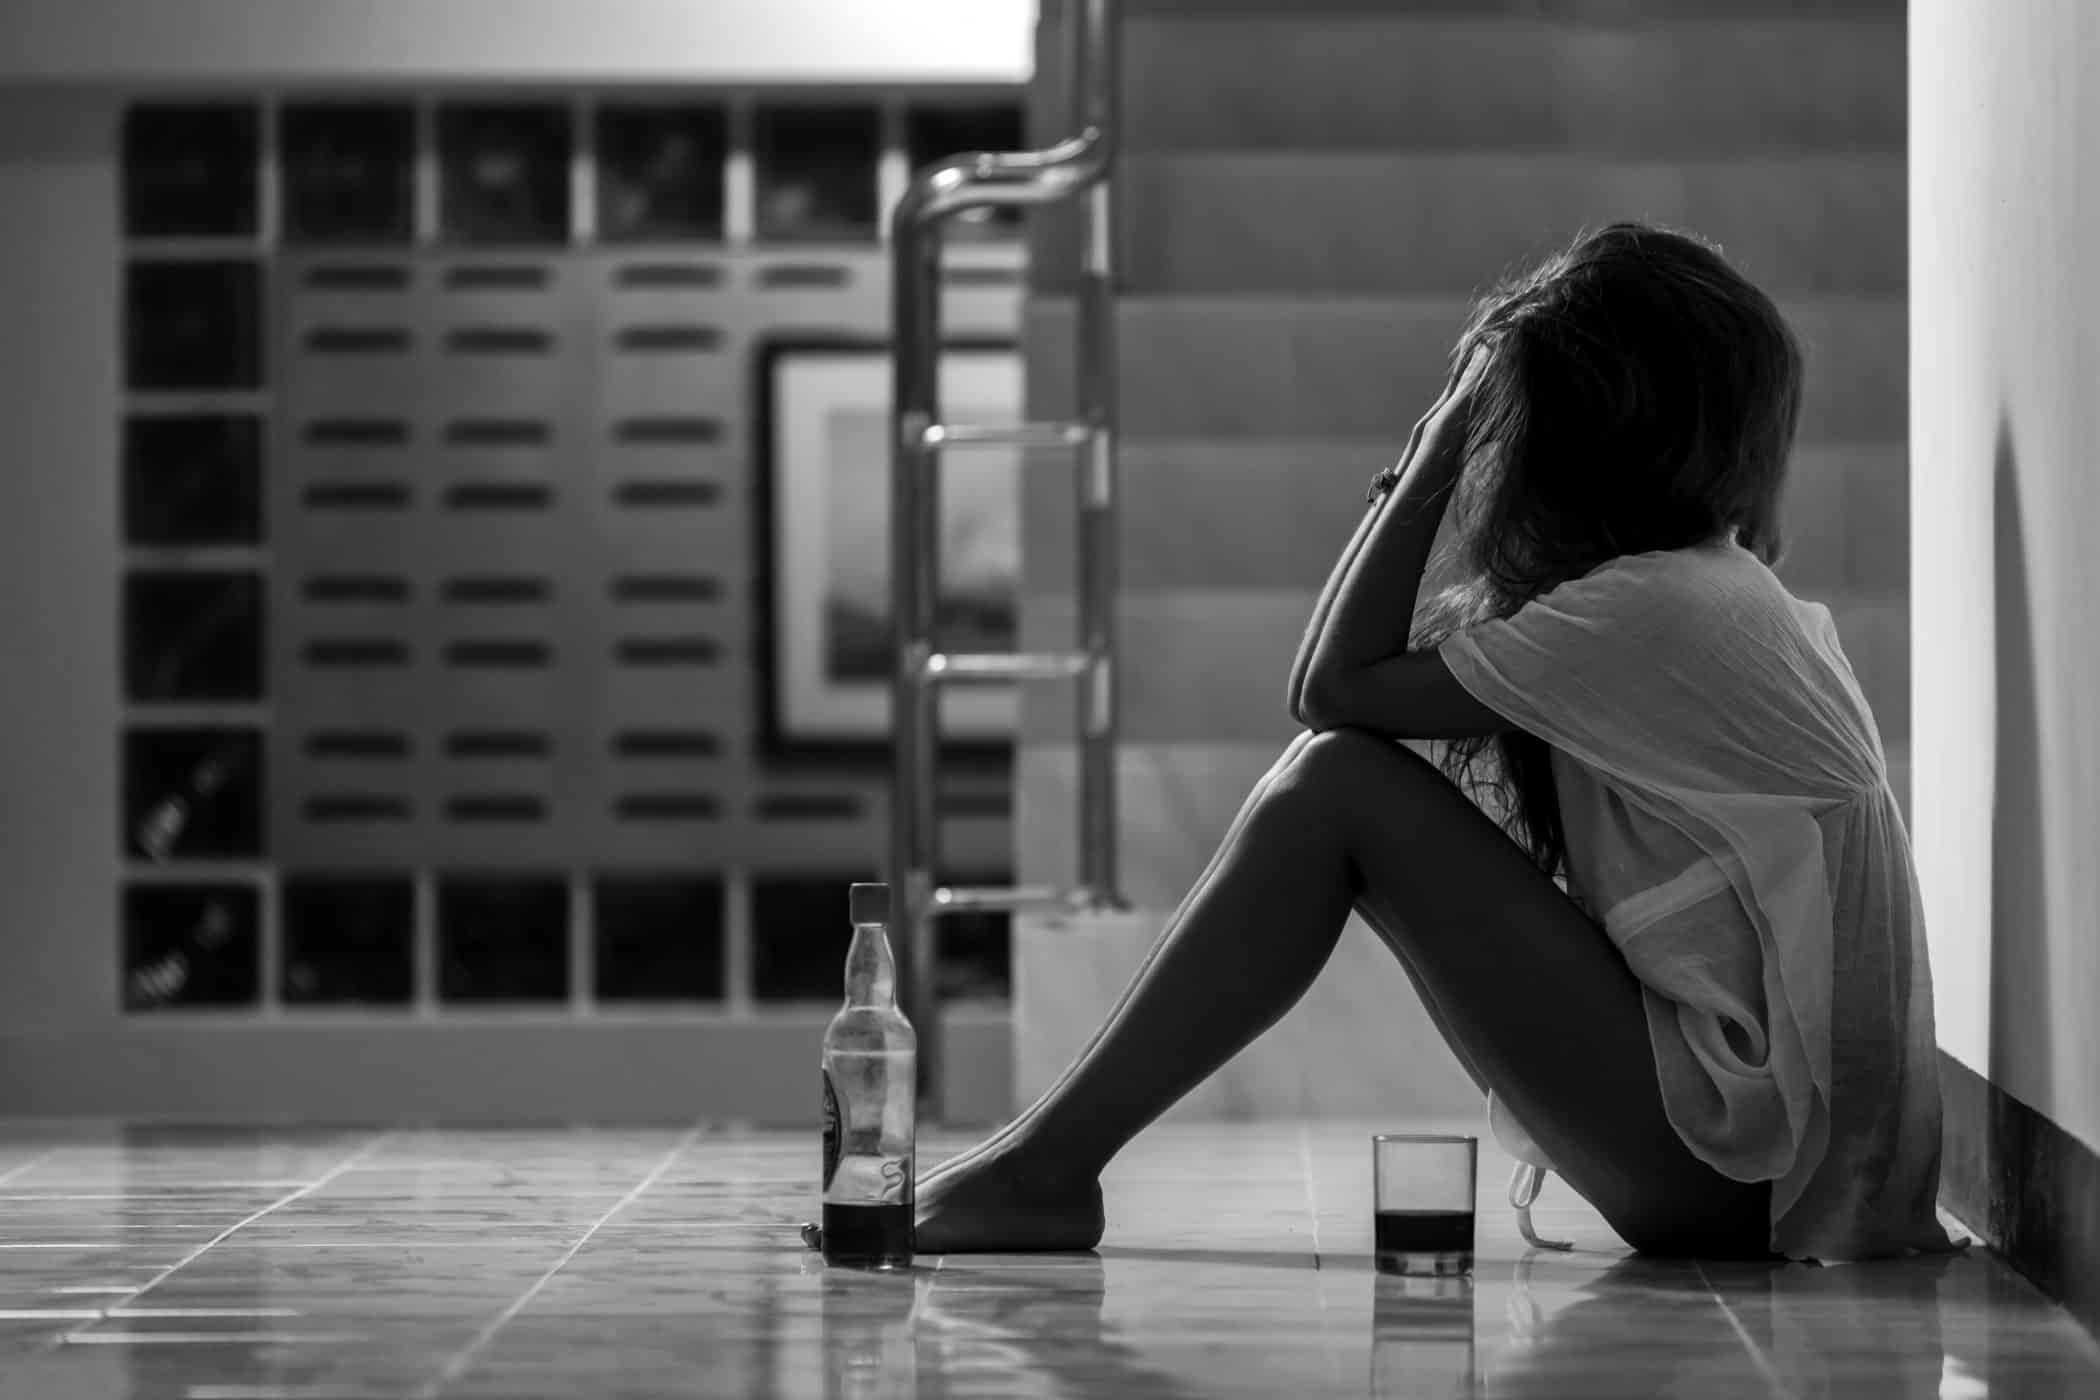 Girl in depression drinking alcohol in solitude